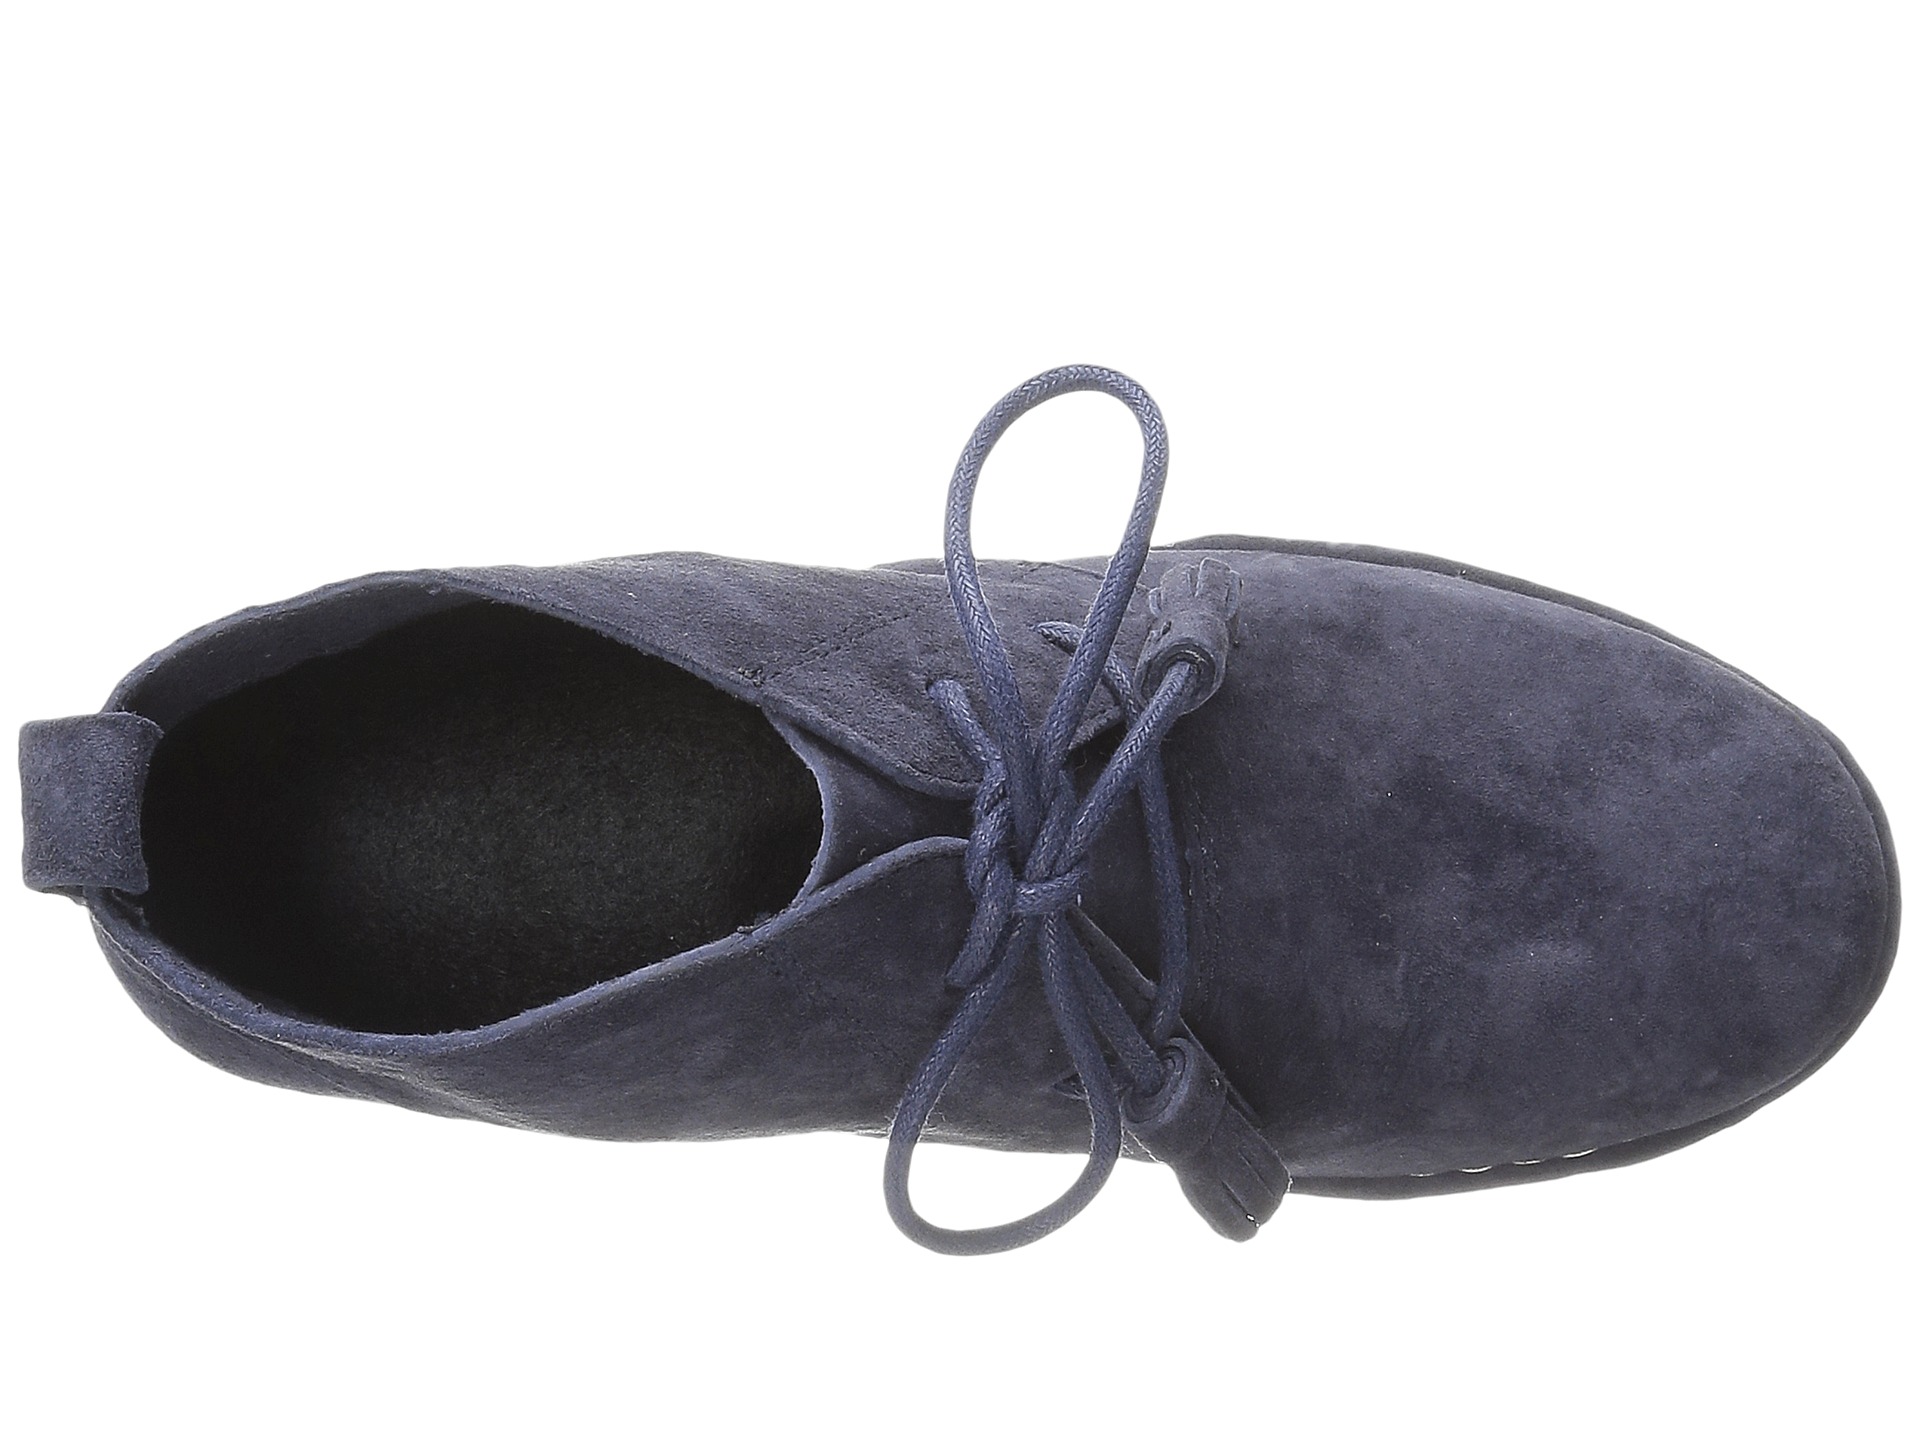 Hush Puppies Cyra Catelyn Navy Suede